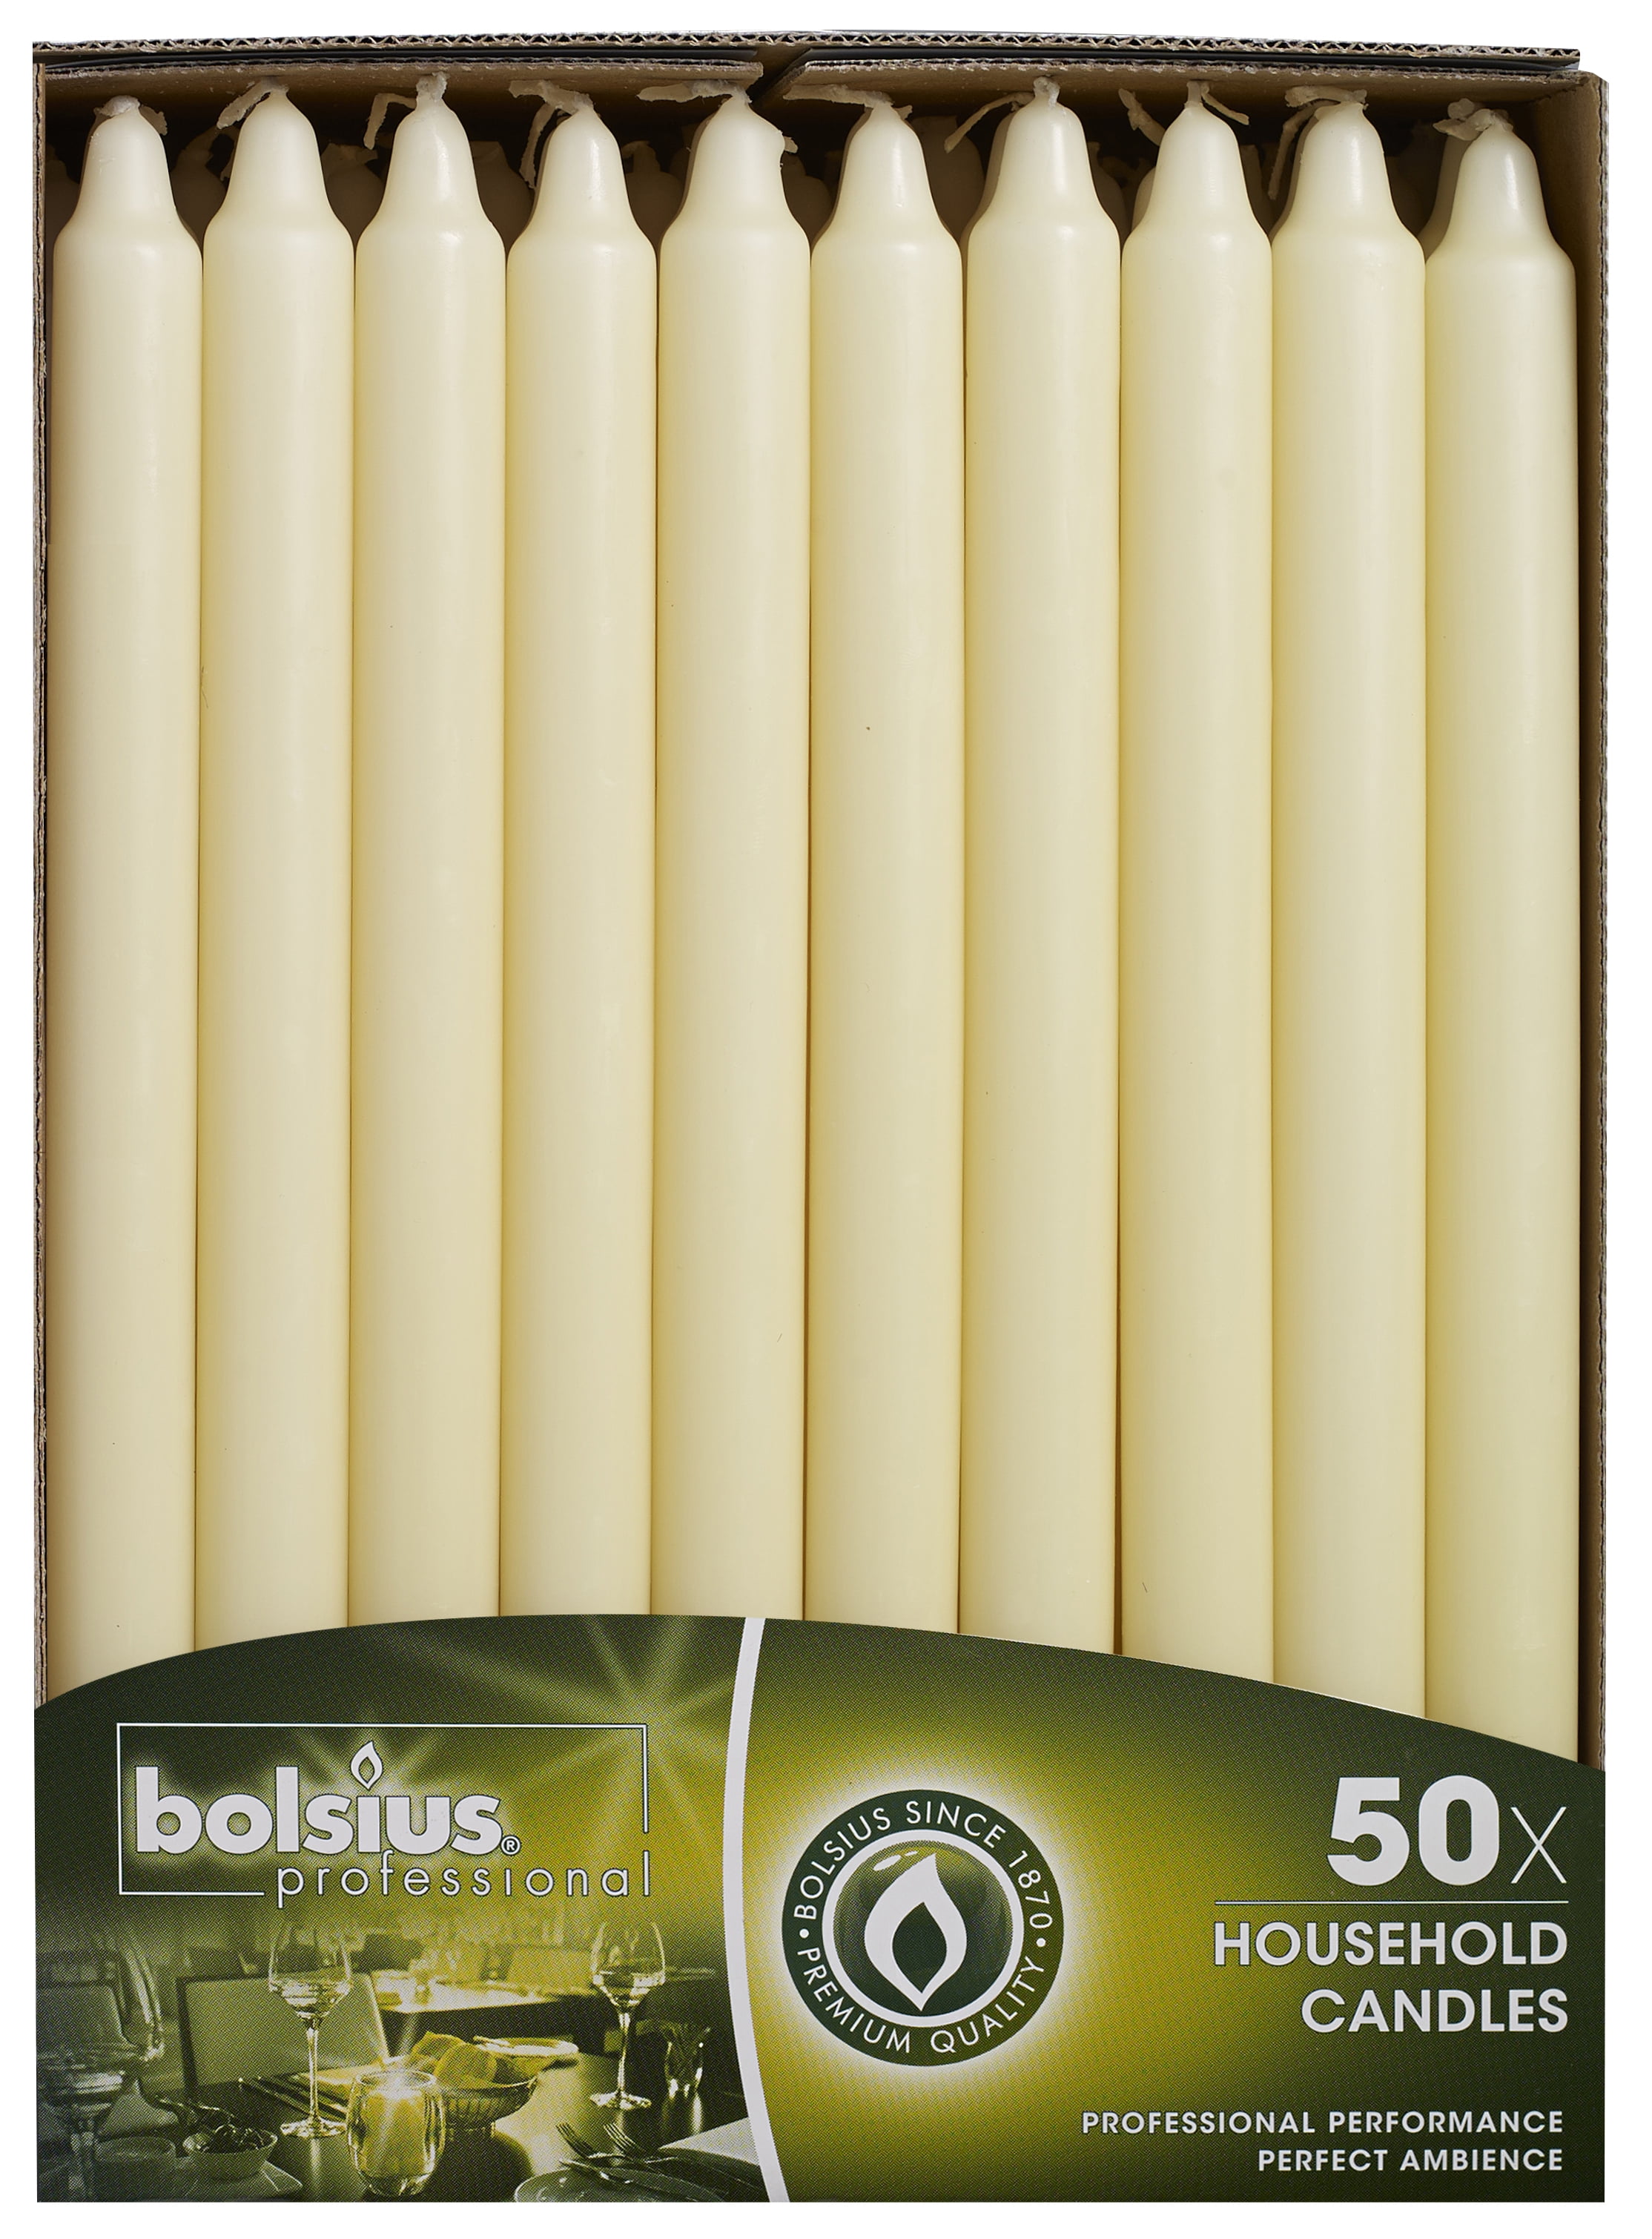 Bolsius Tapered 10in Tabletop Candles in Red Made of Wax Pack of 100 